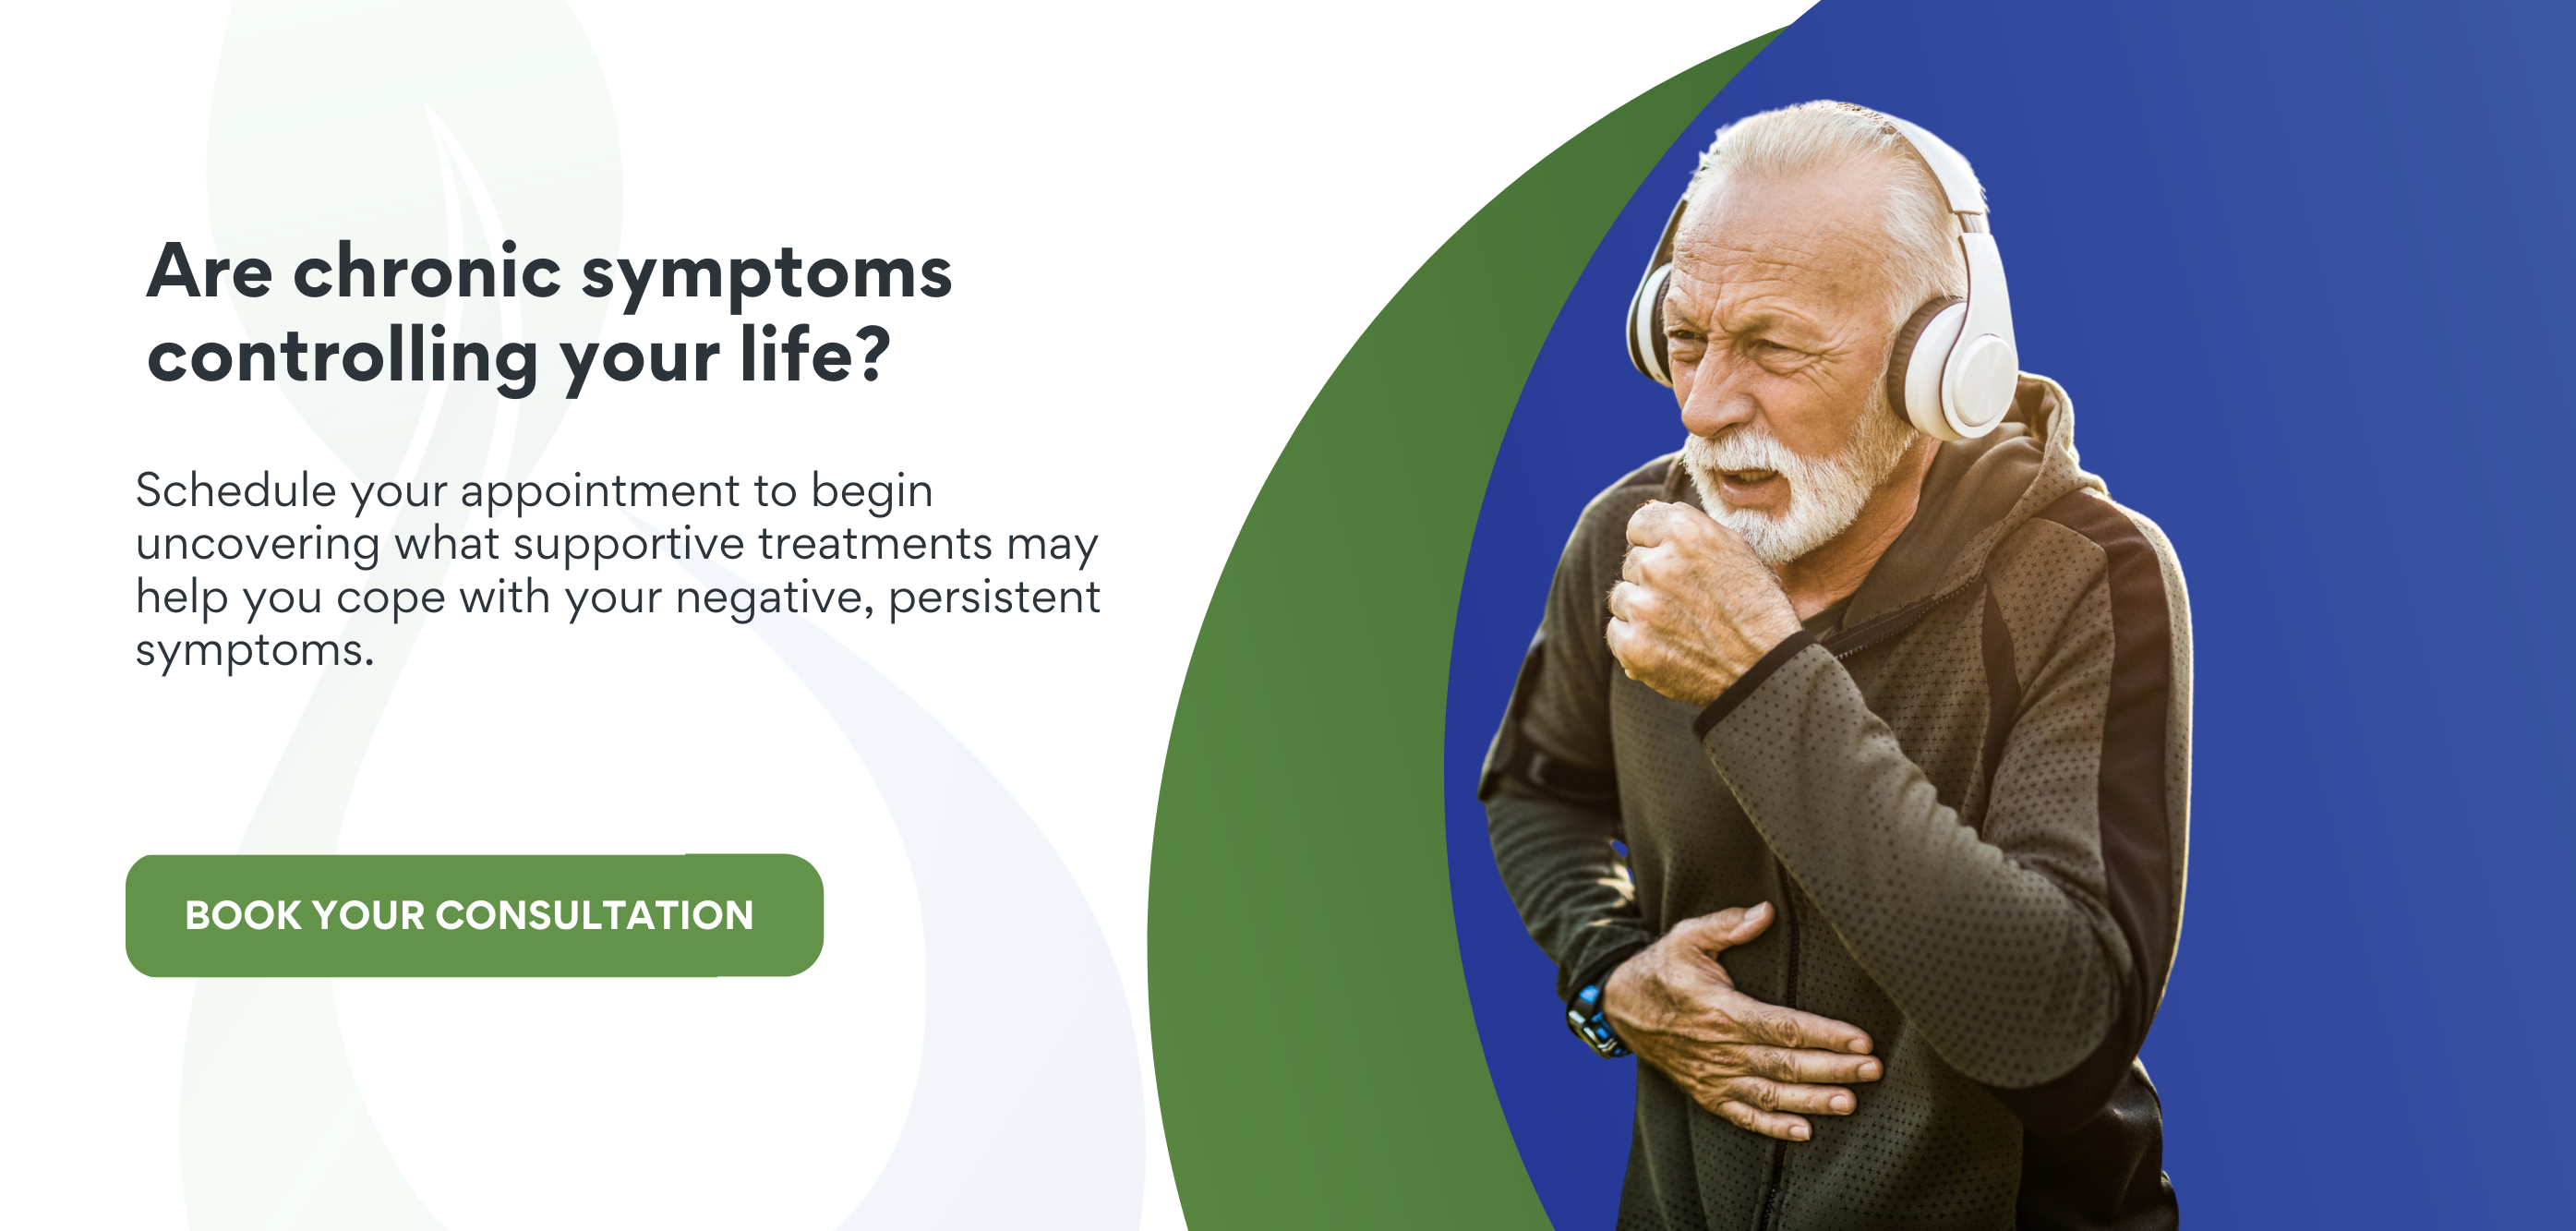 Are chronic symptoms controlling your life conversion banner